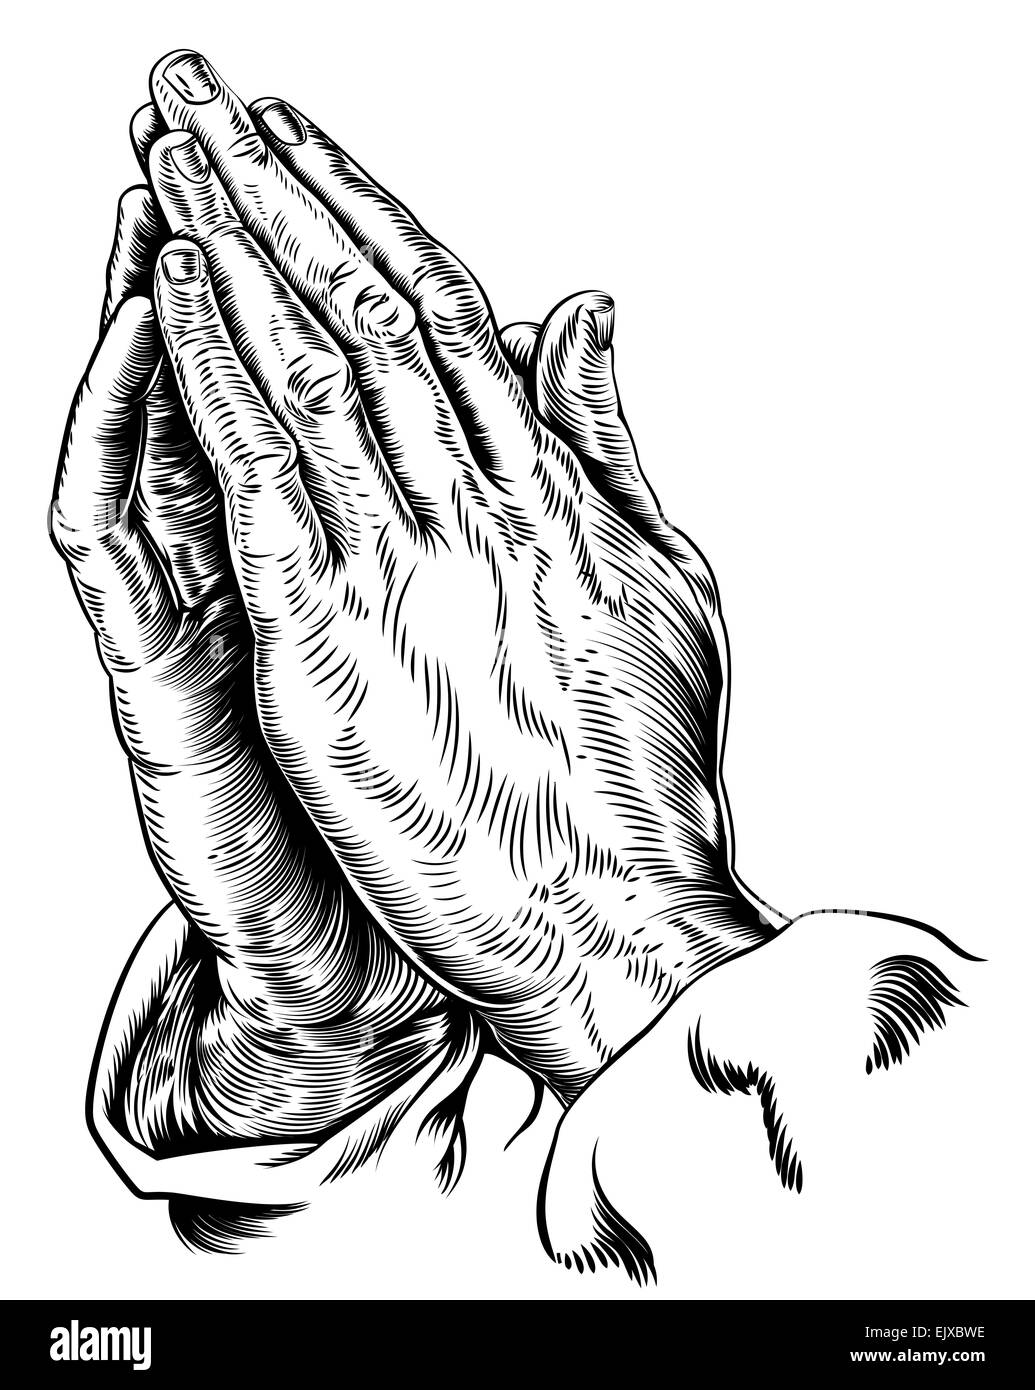 A vector illustration of praying hands inspired by Albrecht Durer s1508 study Stock Photo